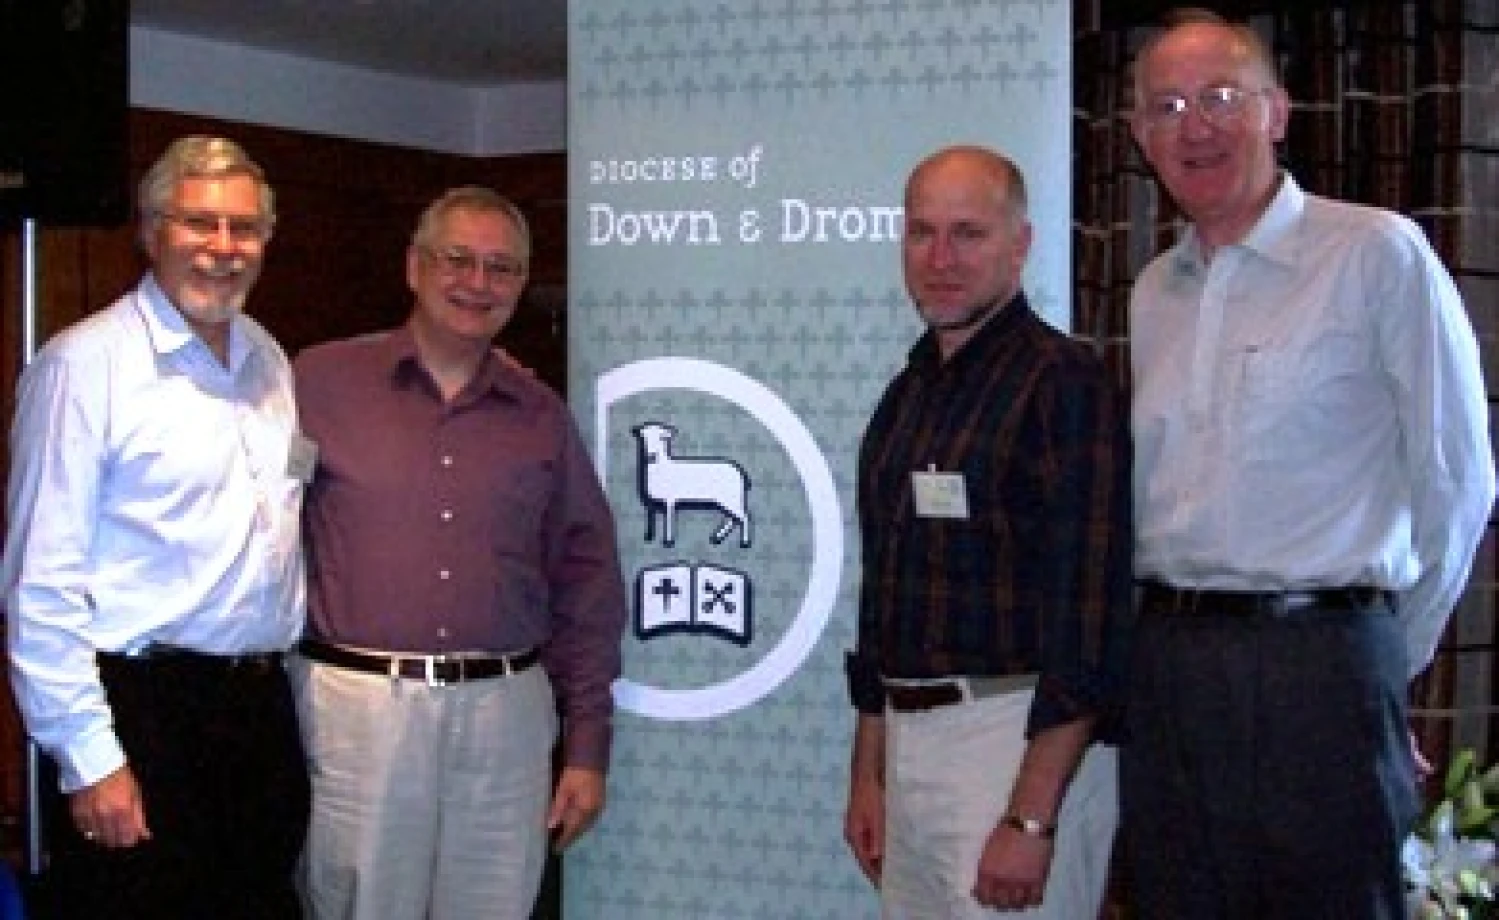 The 2006 Clergy Conference in Donegal